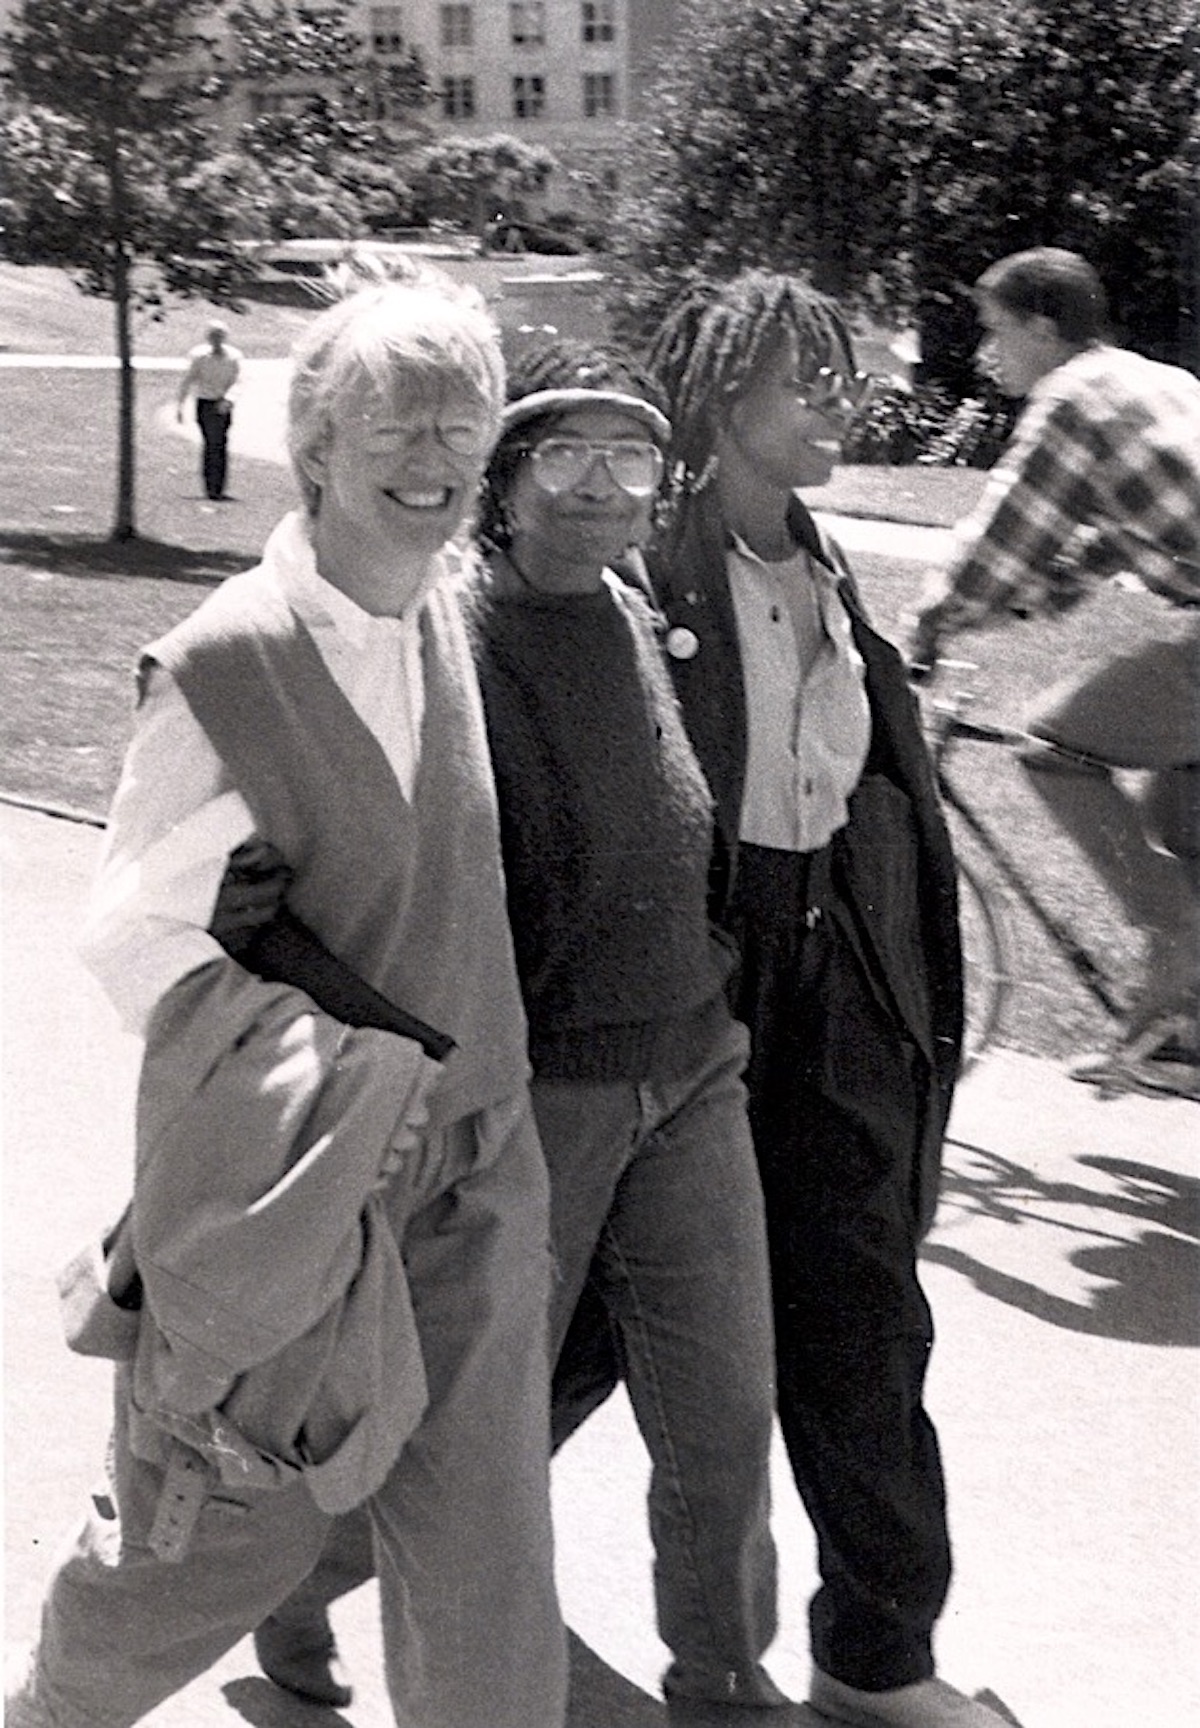 L-R: Susan Griffin, Alice Walker, and Whoopi Goldberg after the Apartheid protest. Photo courtesy of Susan Griffin.